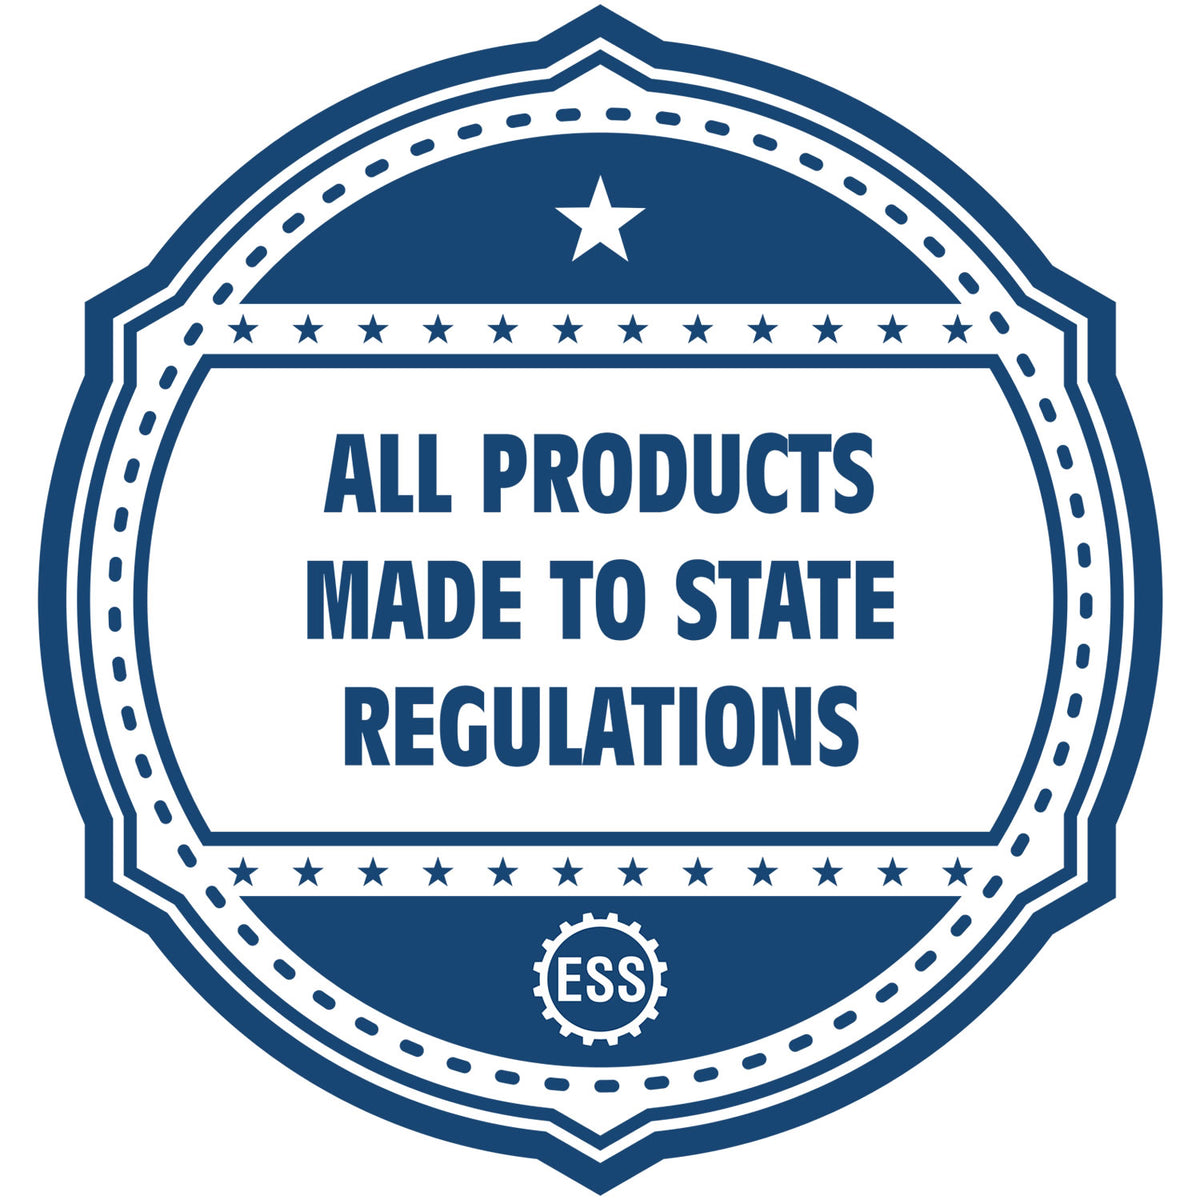 An icon or badge element for the Handheld Mississippi Land Surveyor Seal showing that this product is made in compliance with state regulations.